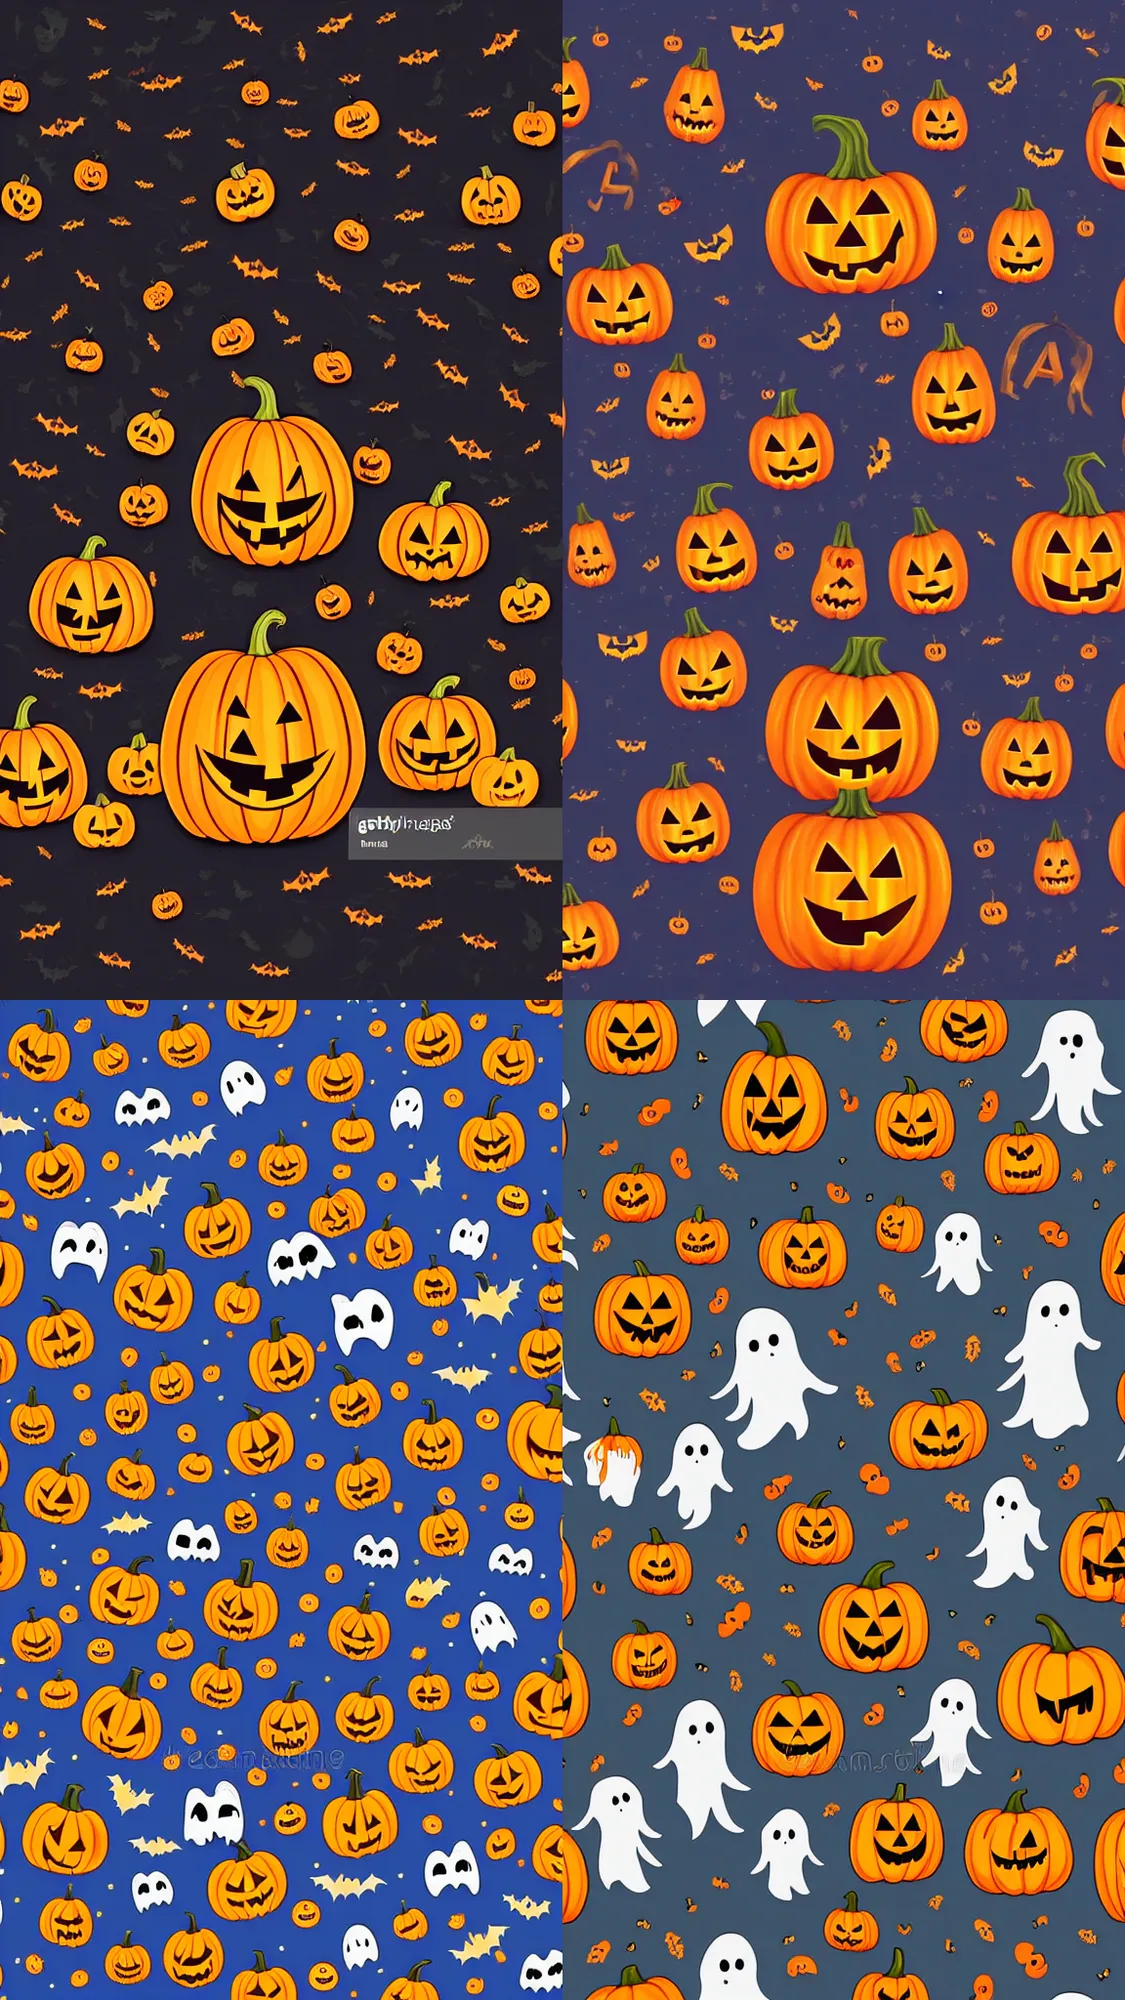 Prompt: Halloween wallpaper with ghosts, candy, jack-o-lanterns, 3D vector illustration cartoon style